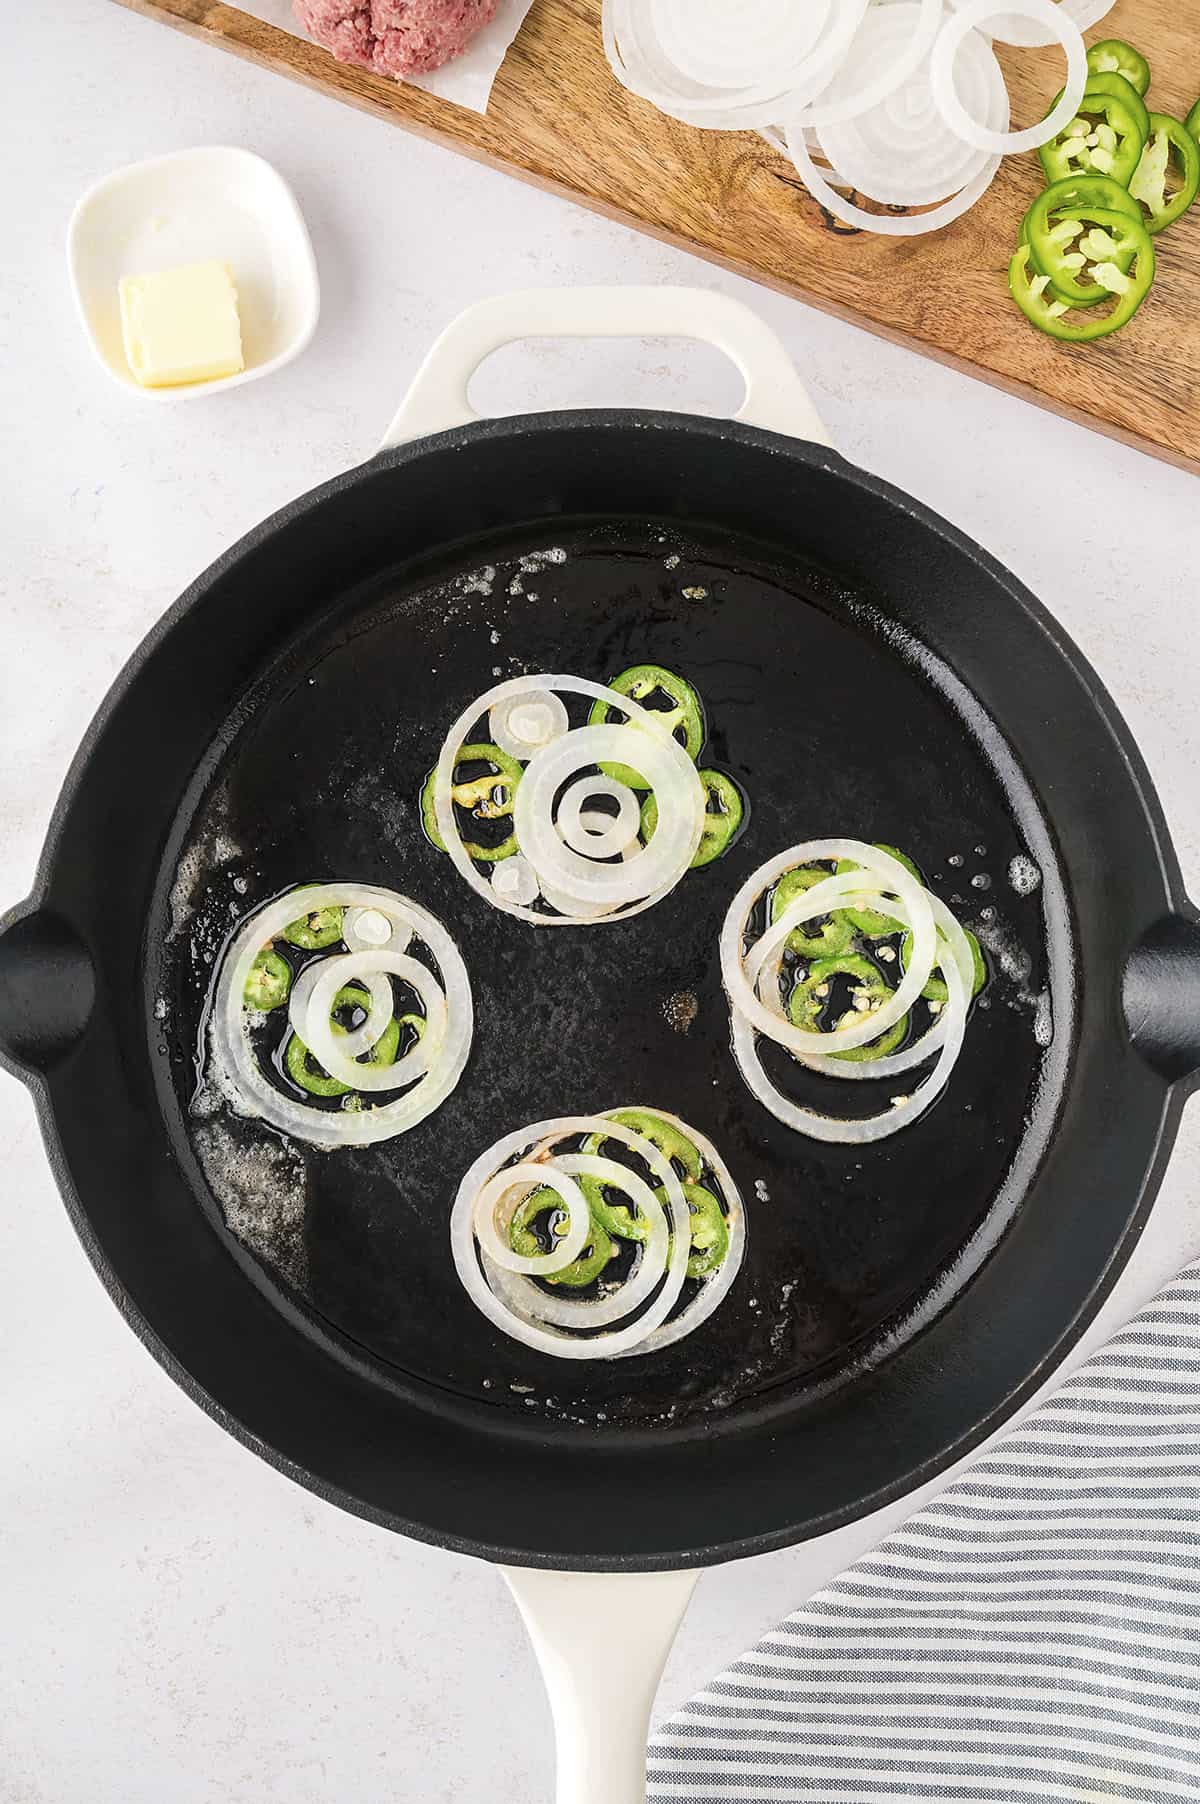 Onion and jalapeno slices in skillet.